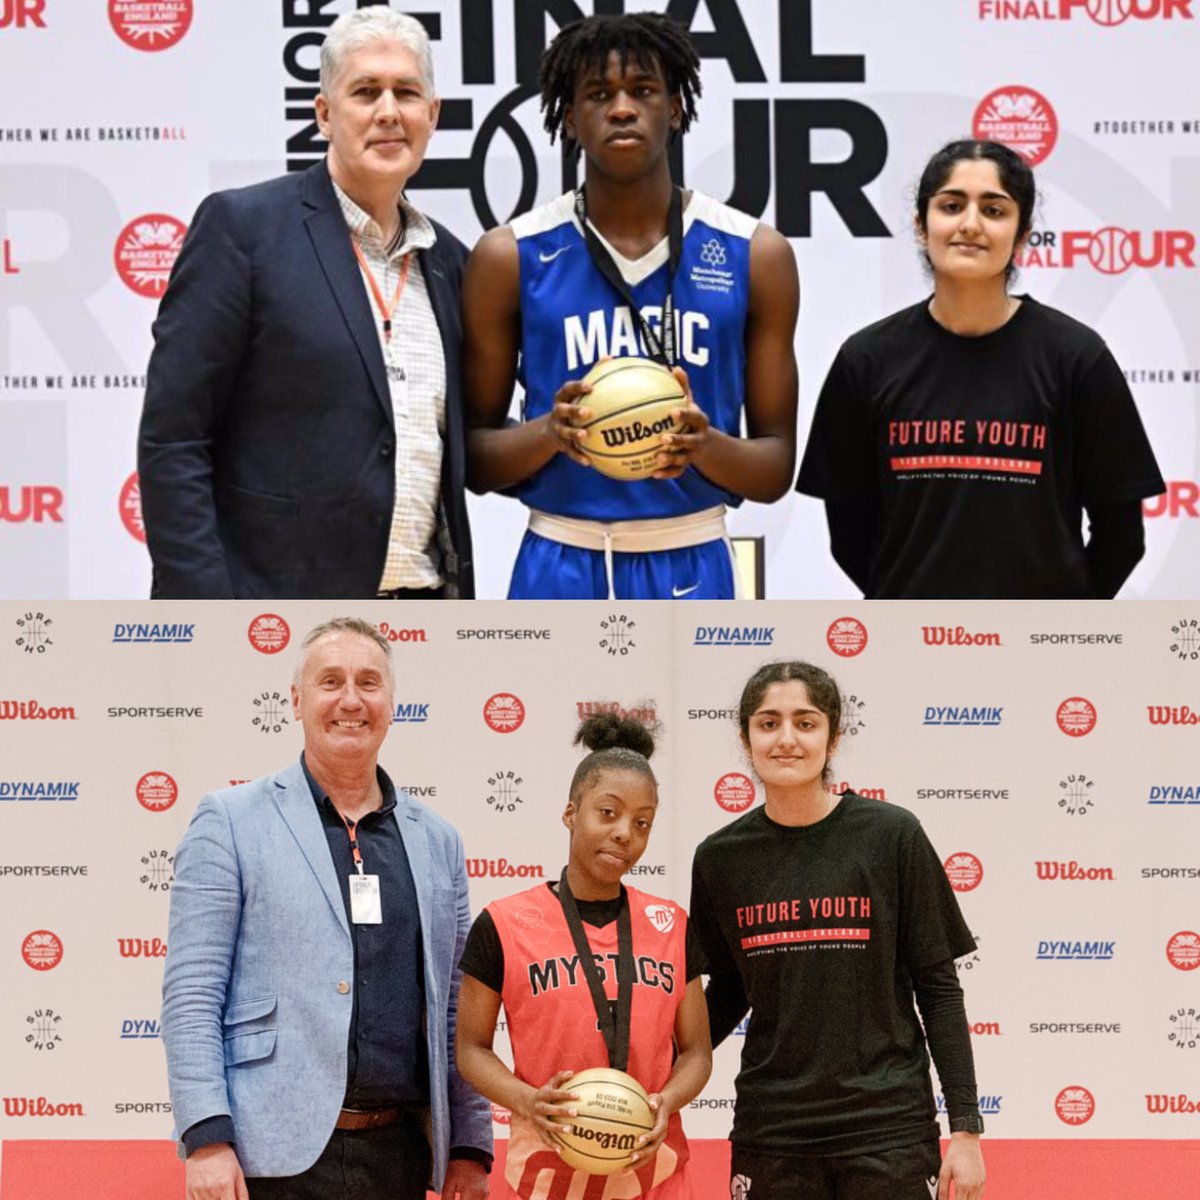 Congratulations to Demi and Akeala who were both crowned MVP this weekend in their respective age groups 👏